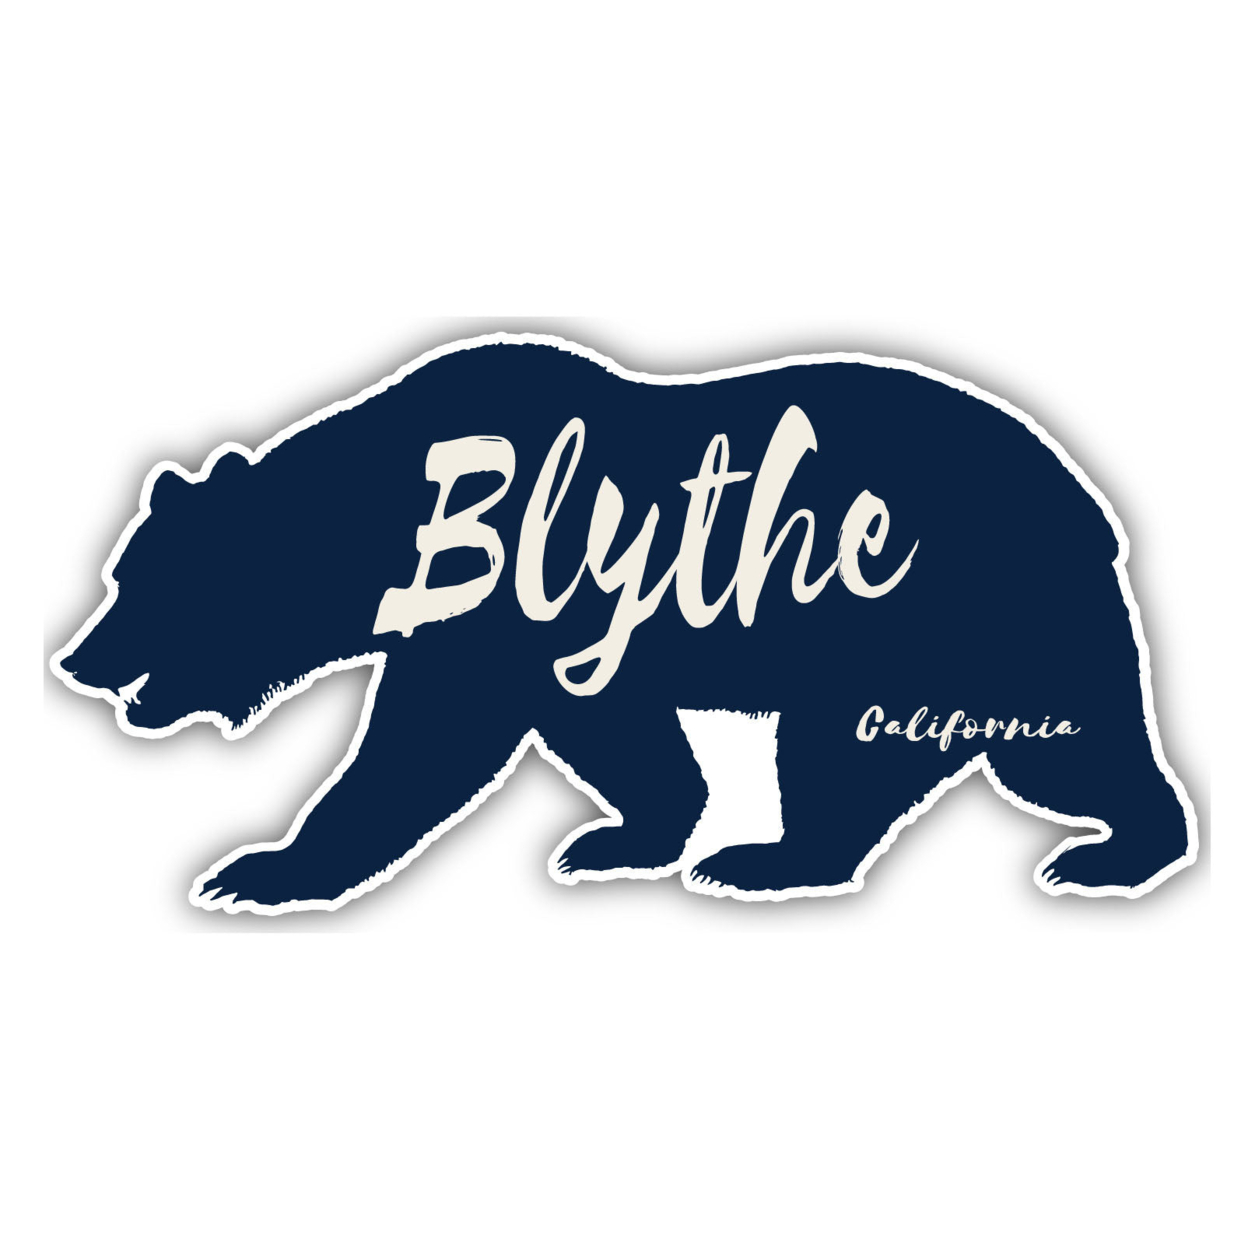 Blythe California Souvenir Decorative Stickers (Choose Theme And Size) - 4-Pack, 12-Inch, Great Outdoors